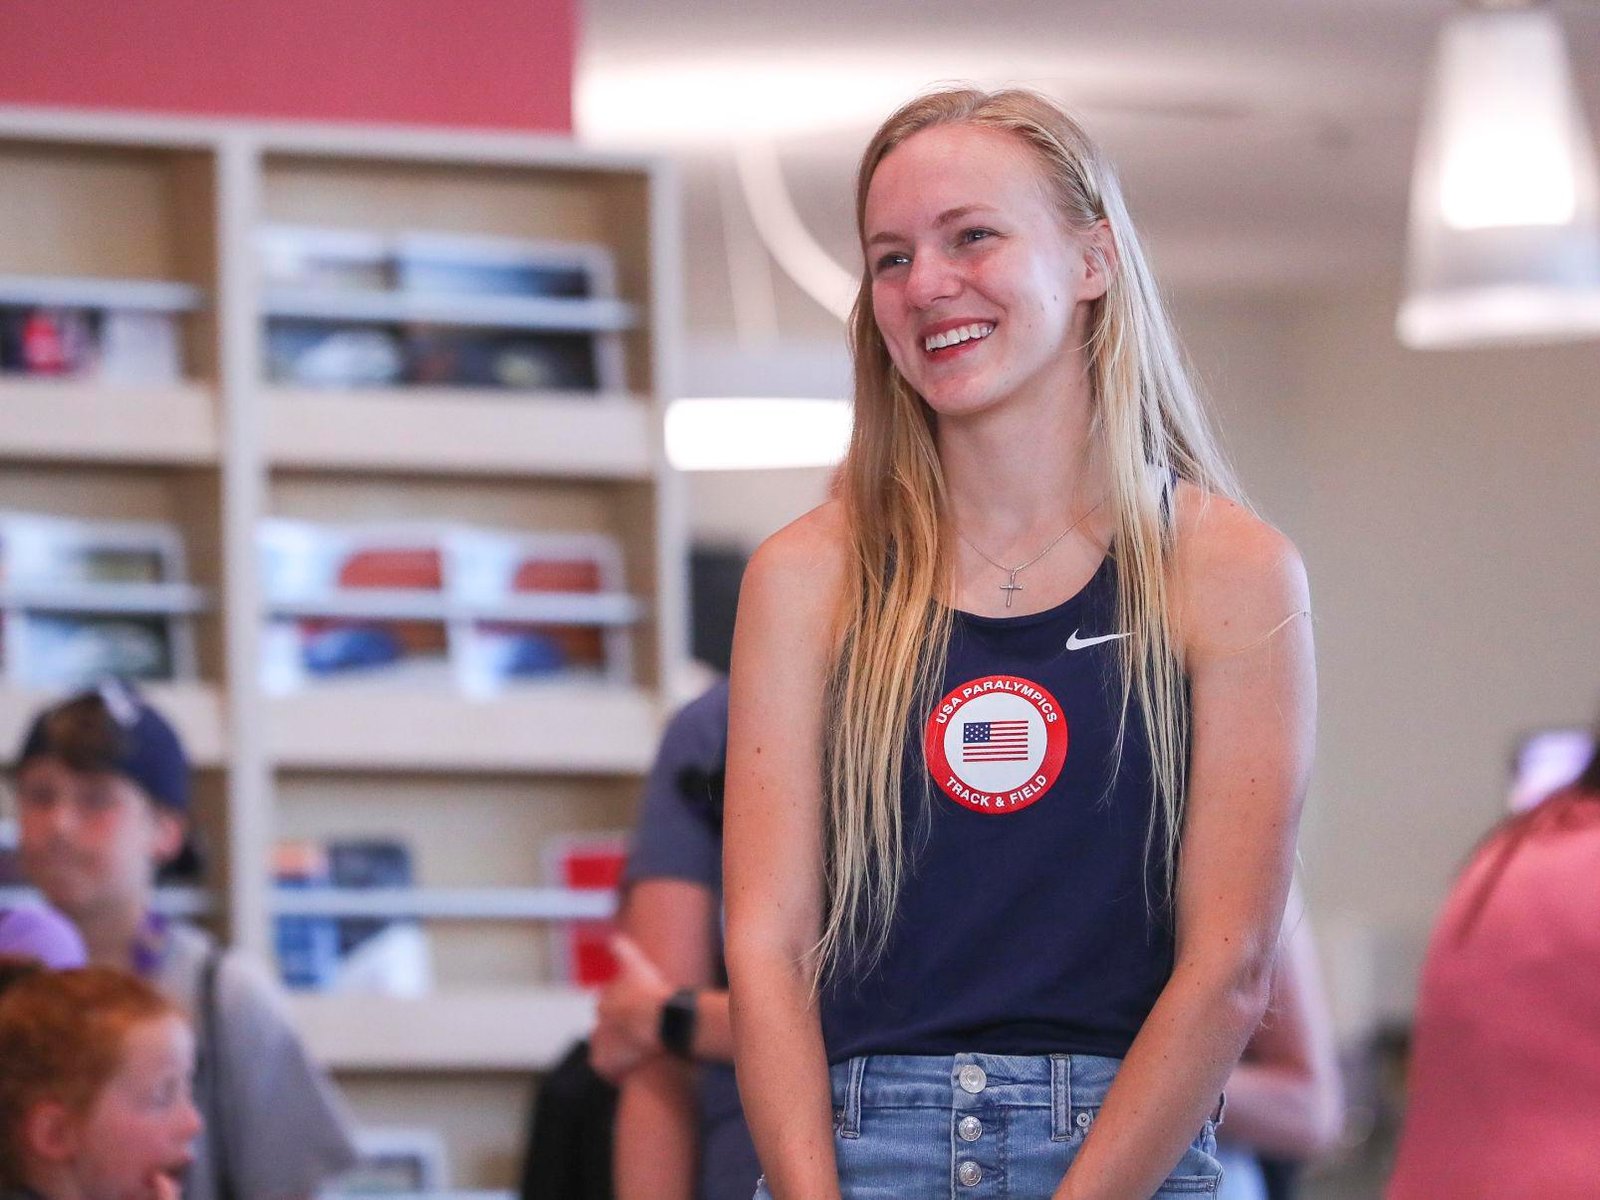 Jessica, wearing a navy blue USA tank top over her jeans, smiling while listening to someone speaking